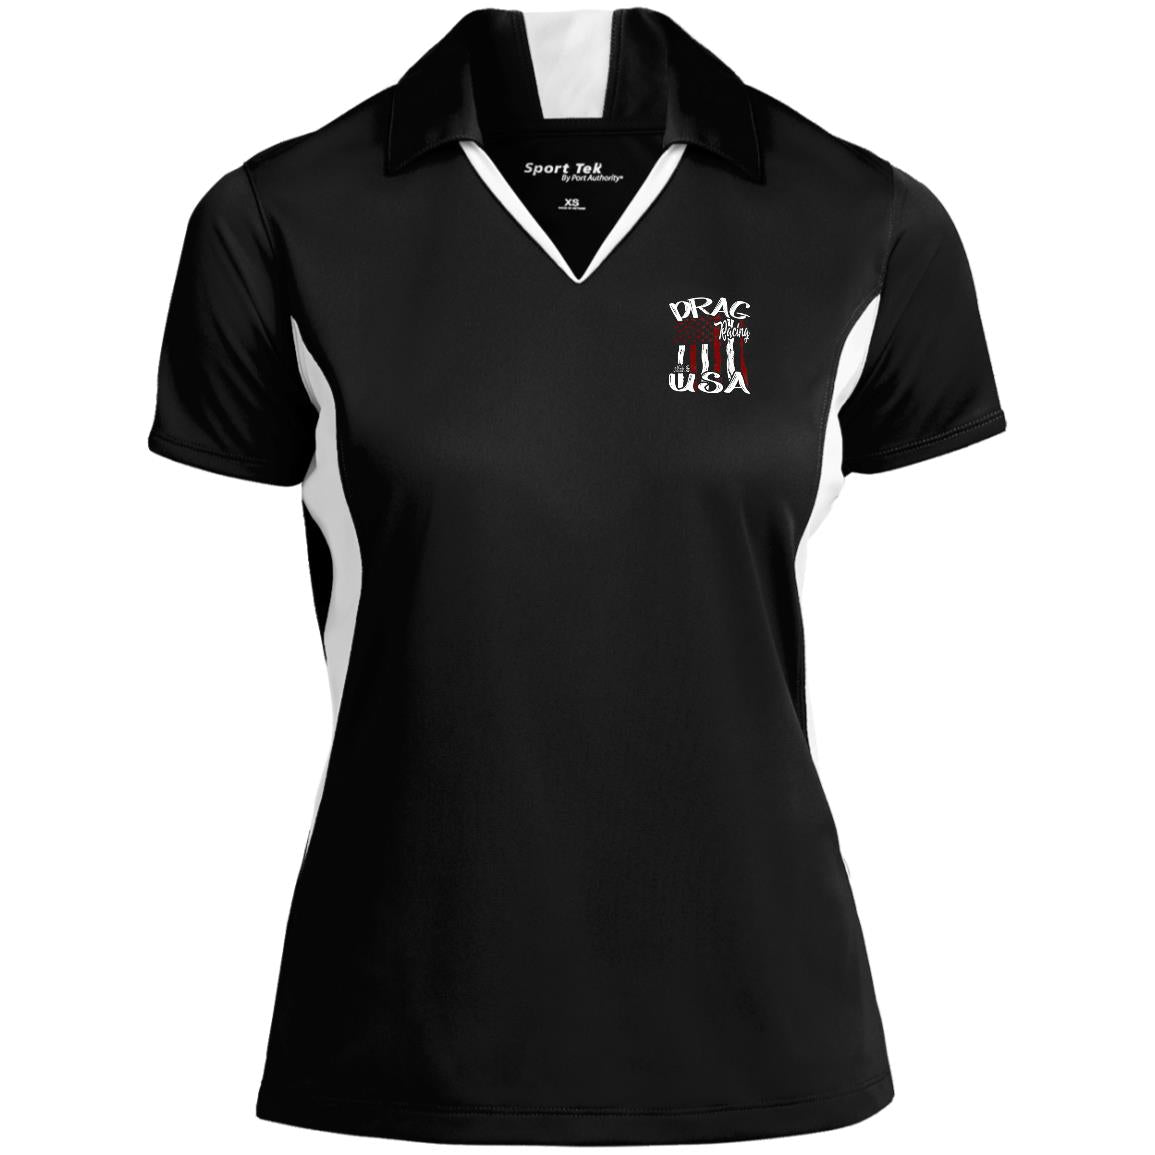 Drag Racing Made In USA Ladies' Colorblock Performance Polo